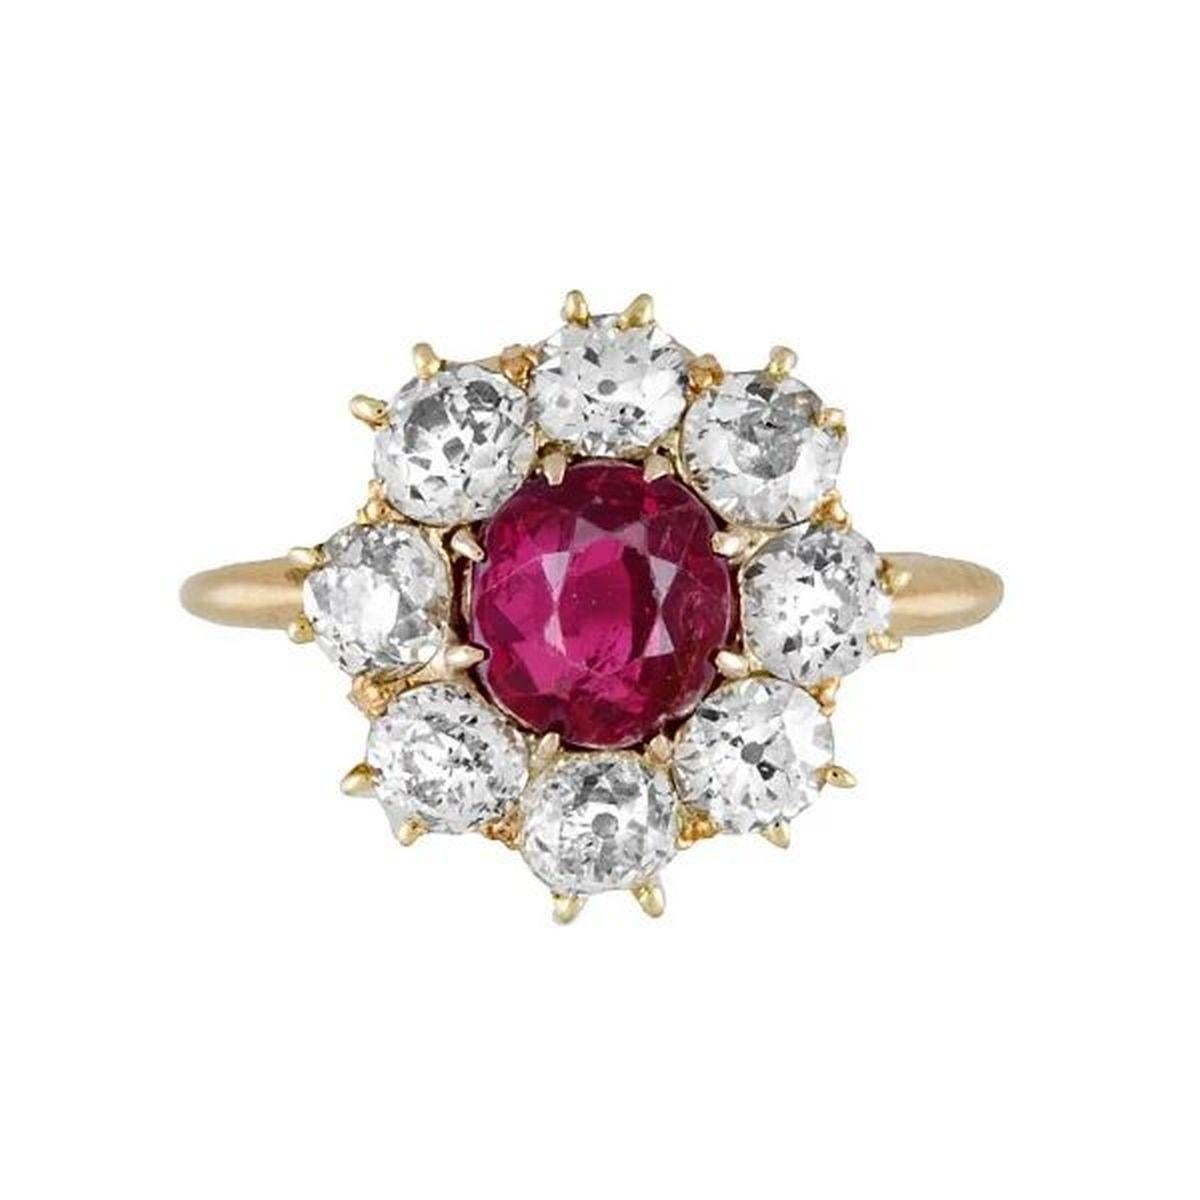 Simply Beautiful! Finely detailed GIA NO HEAT Burma Ruby and Diamond Vintage Antique Gold Ring. Centering a securely nestled Hand set Round NO HEAT Burma Ruby weighing approx. 1.60 Carat. GIA lab report # 6224958874. Surrounded by Diamonds, approx.